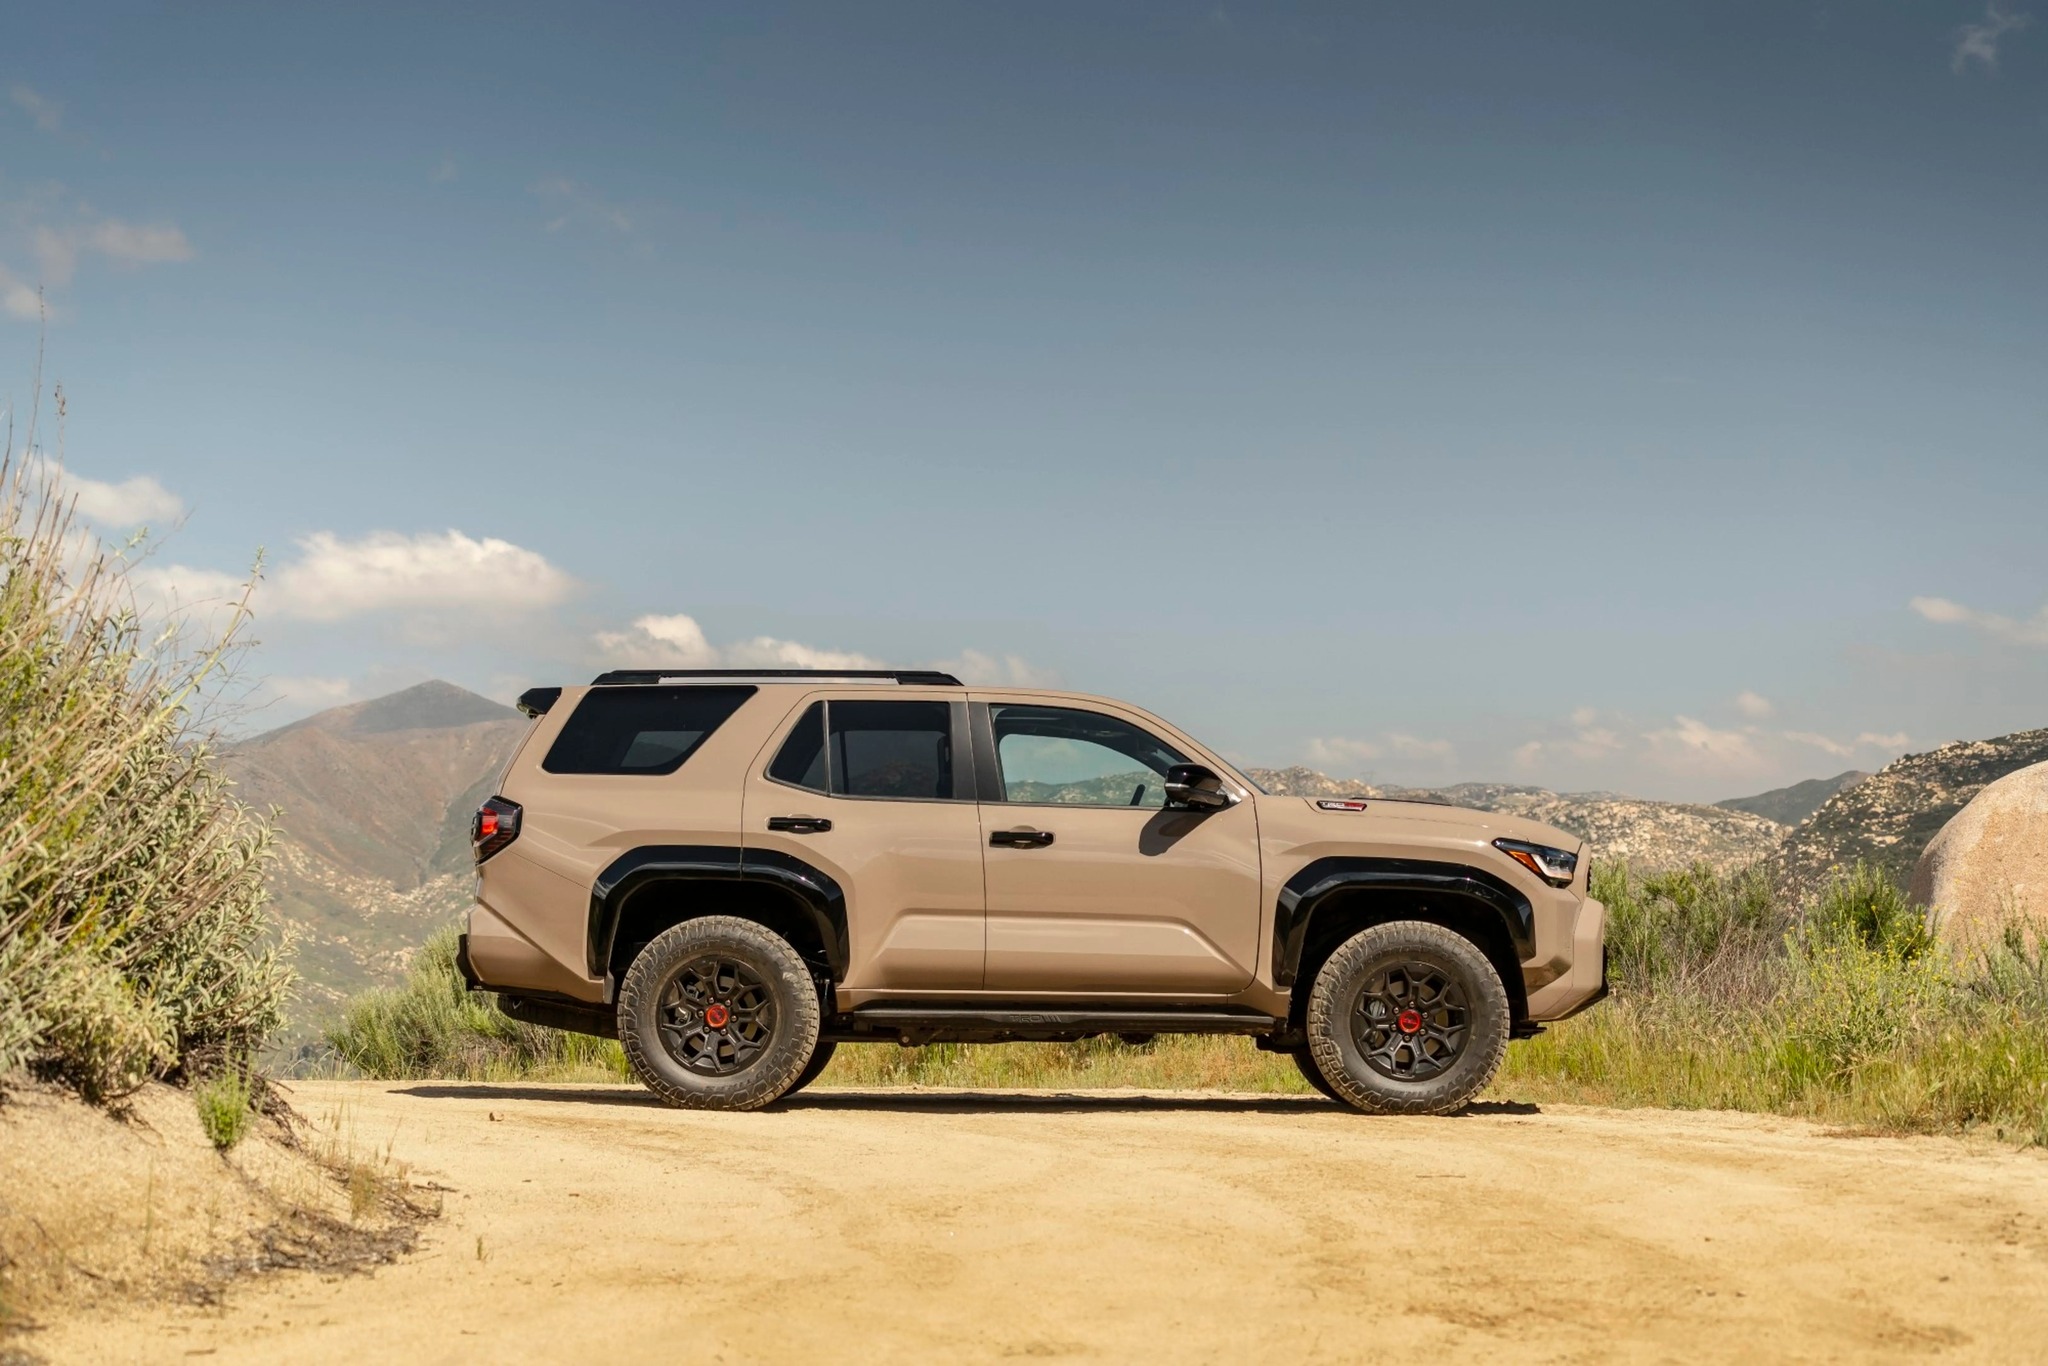 2025 Toyota 4runner 2025 4Runner Photos & Specs! 🔥 Trailhunter, TRD Pro, Off-Road, Limited Trims 2025-toyota-4runner-wallpapers-1-